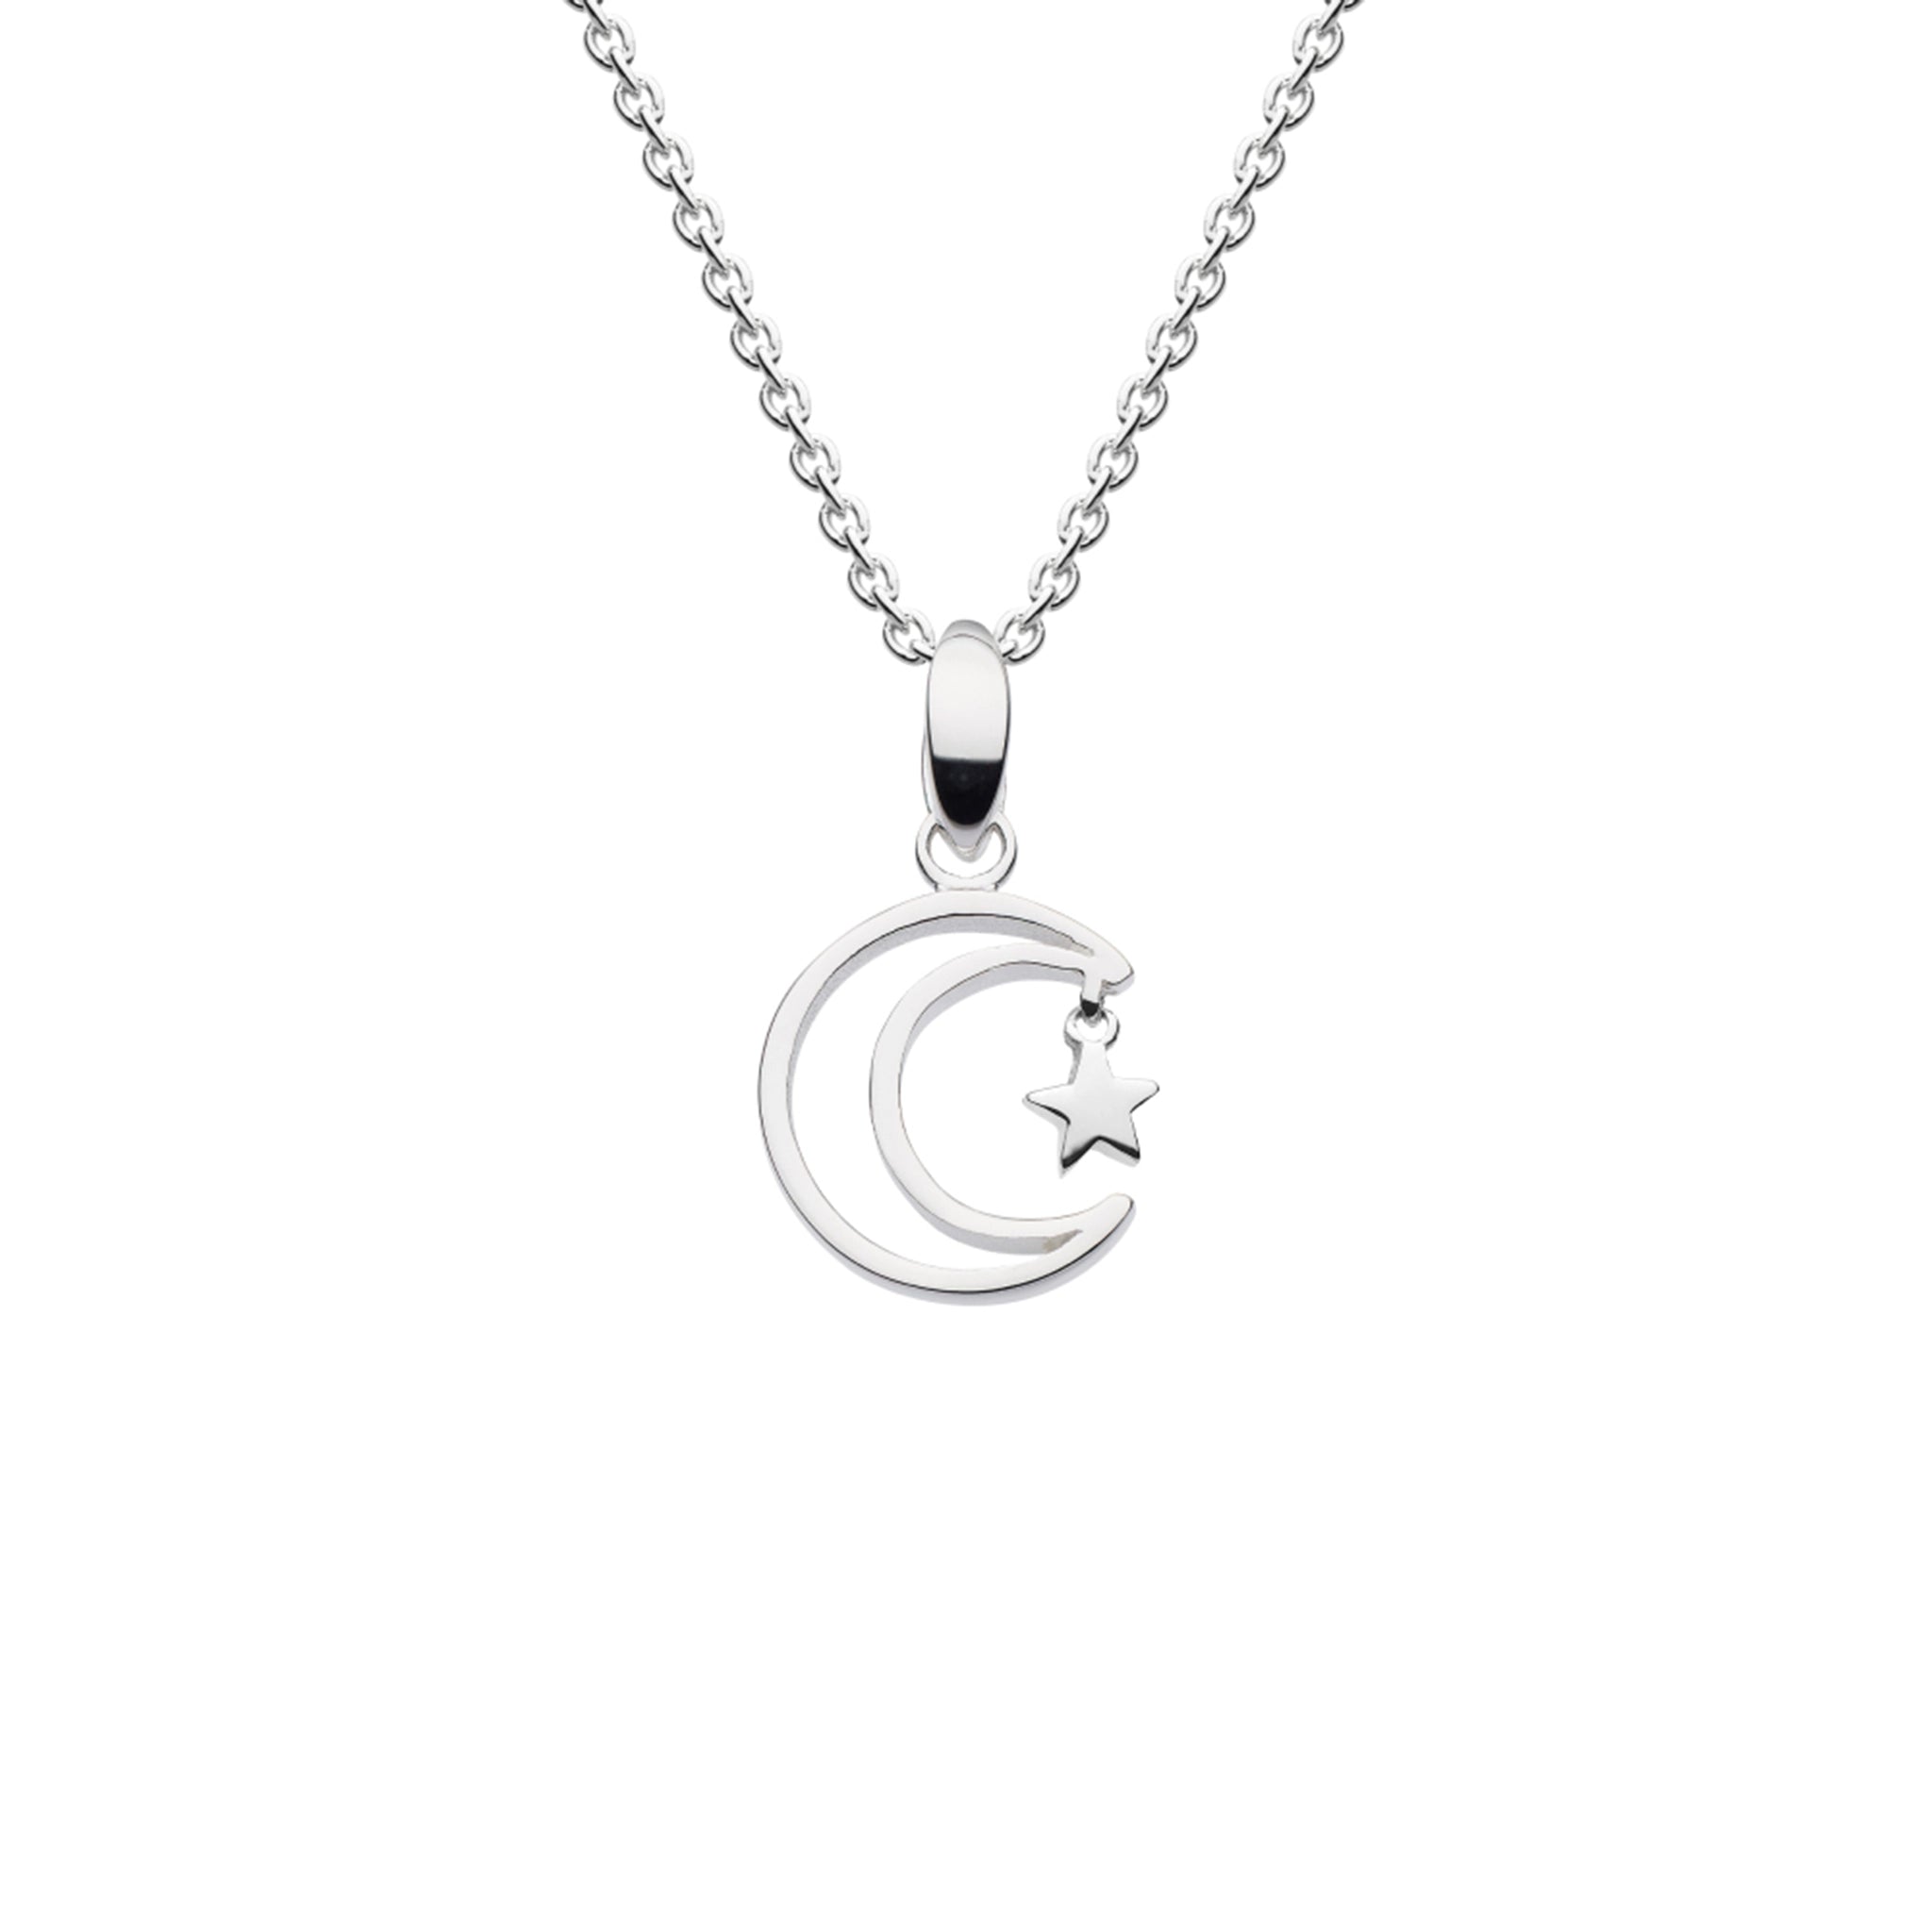 A silver pendant featuring a crescent moon with a drop star and a silver chain